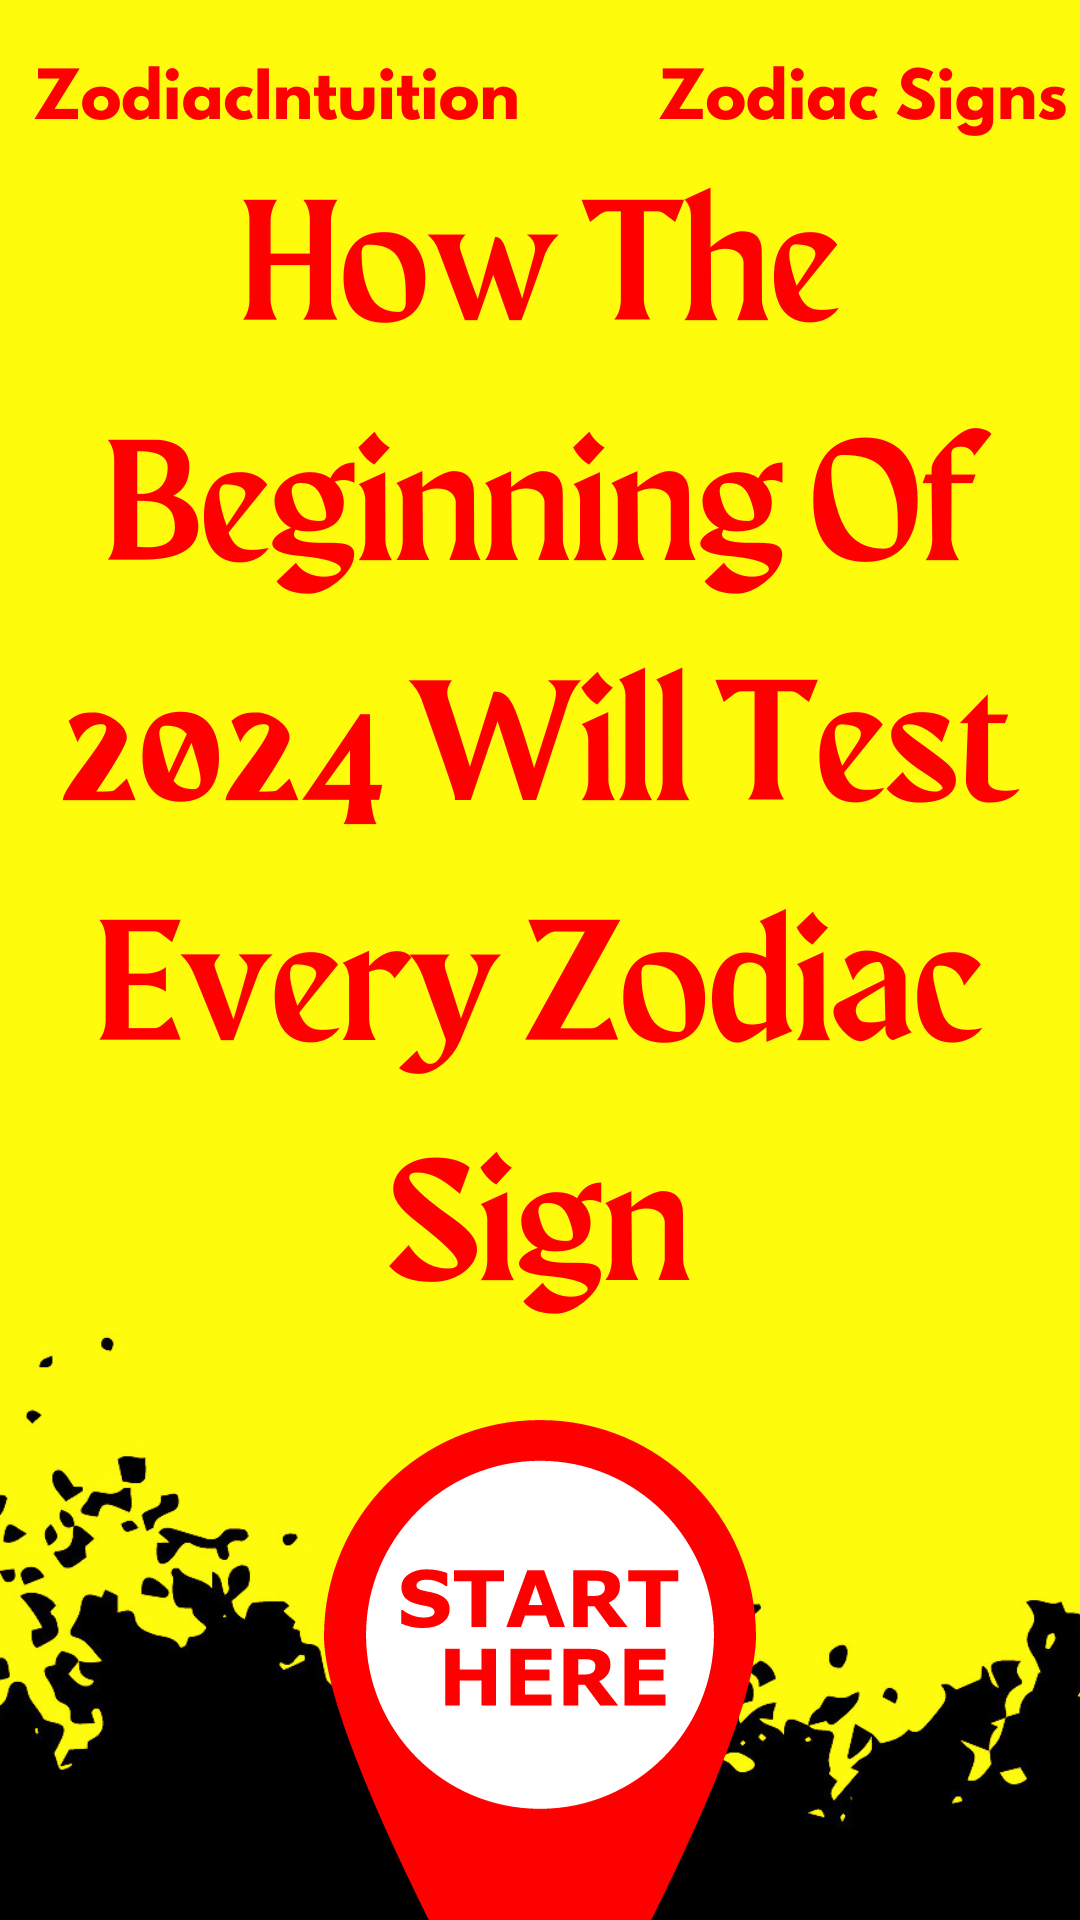 How The Beginning Of 2024 Will Test Every Zodiac Sign